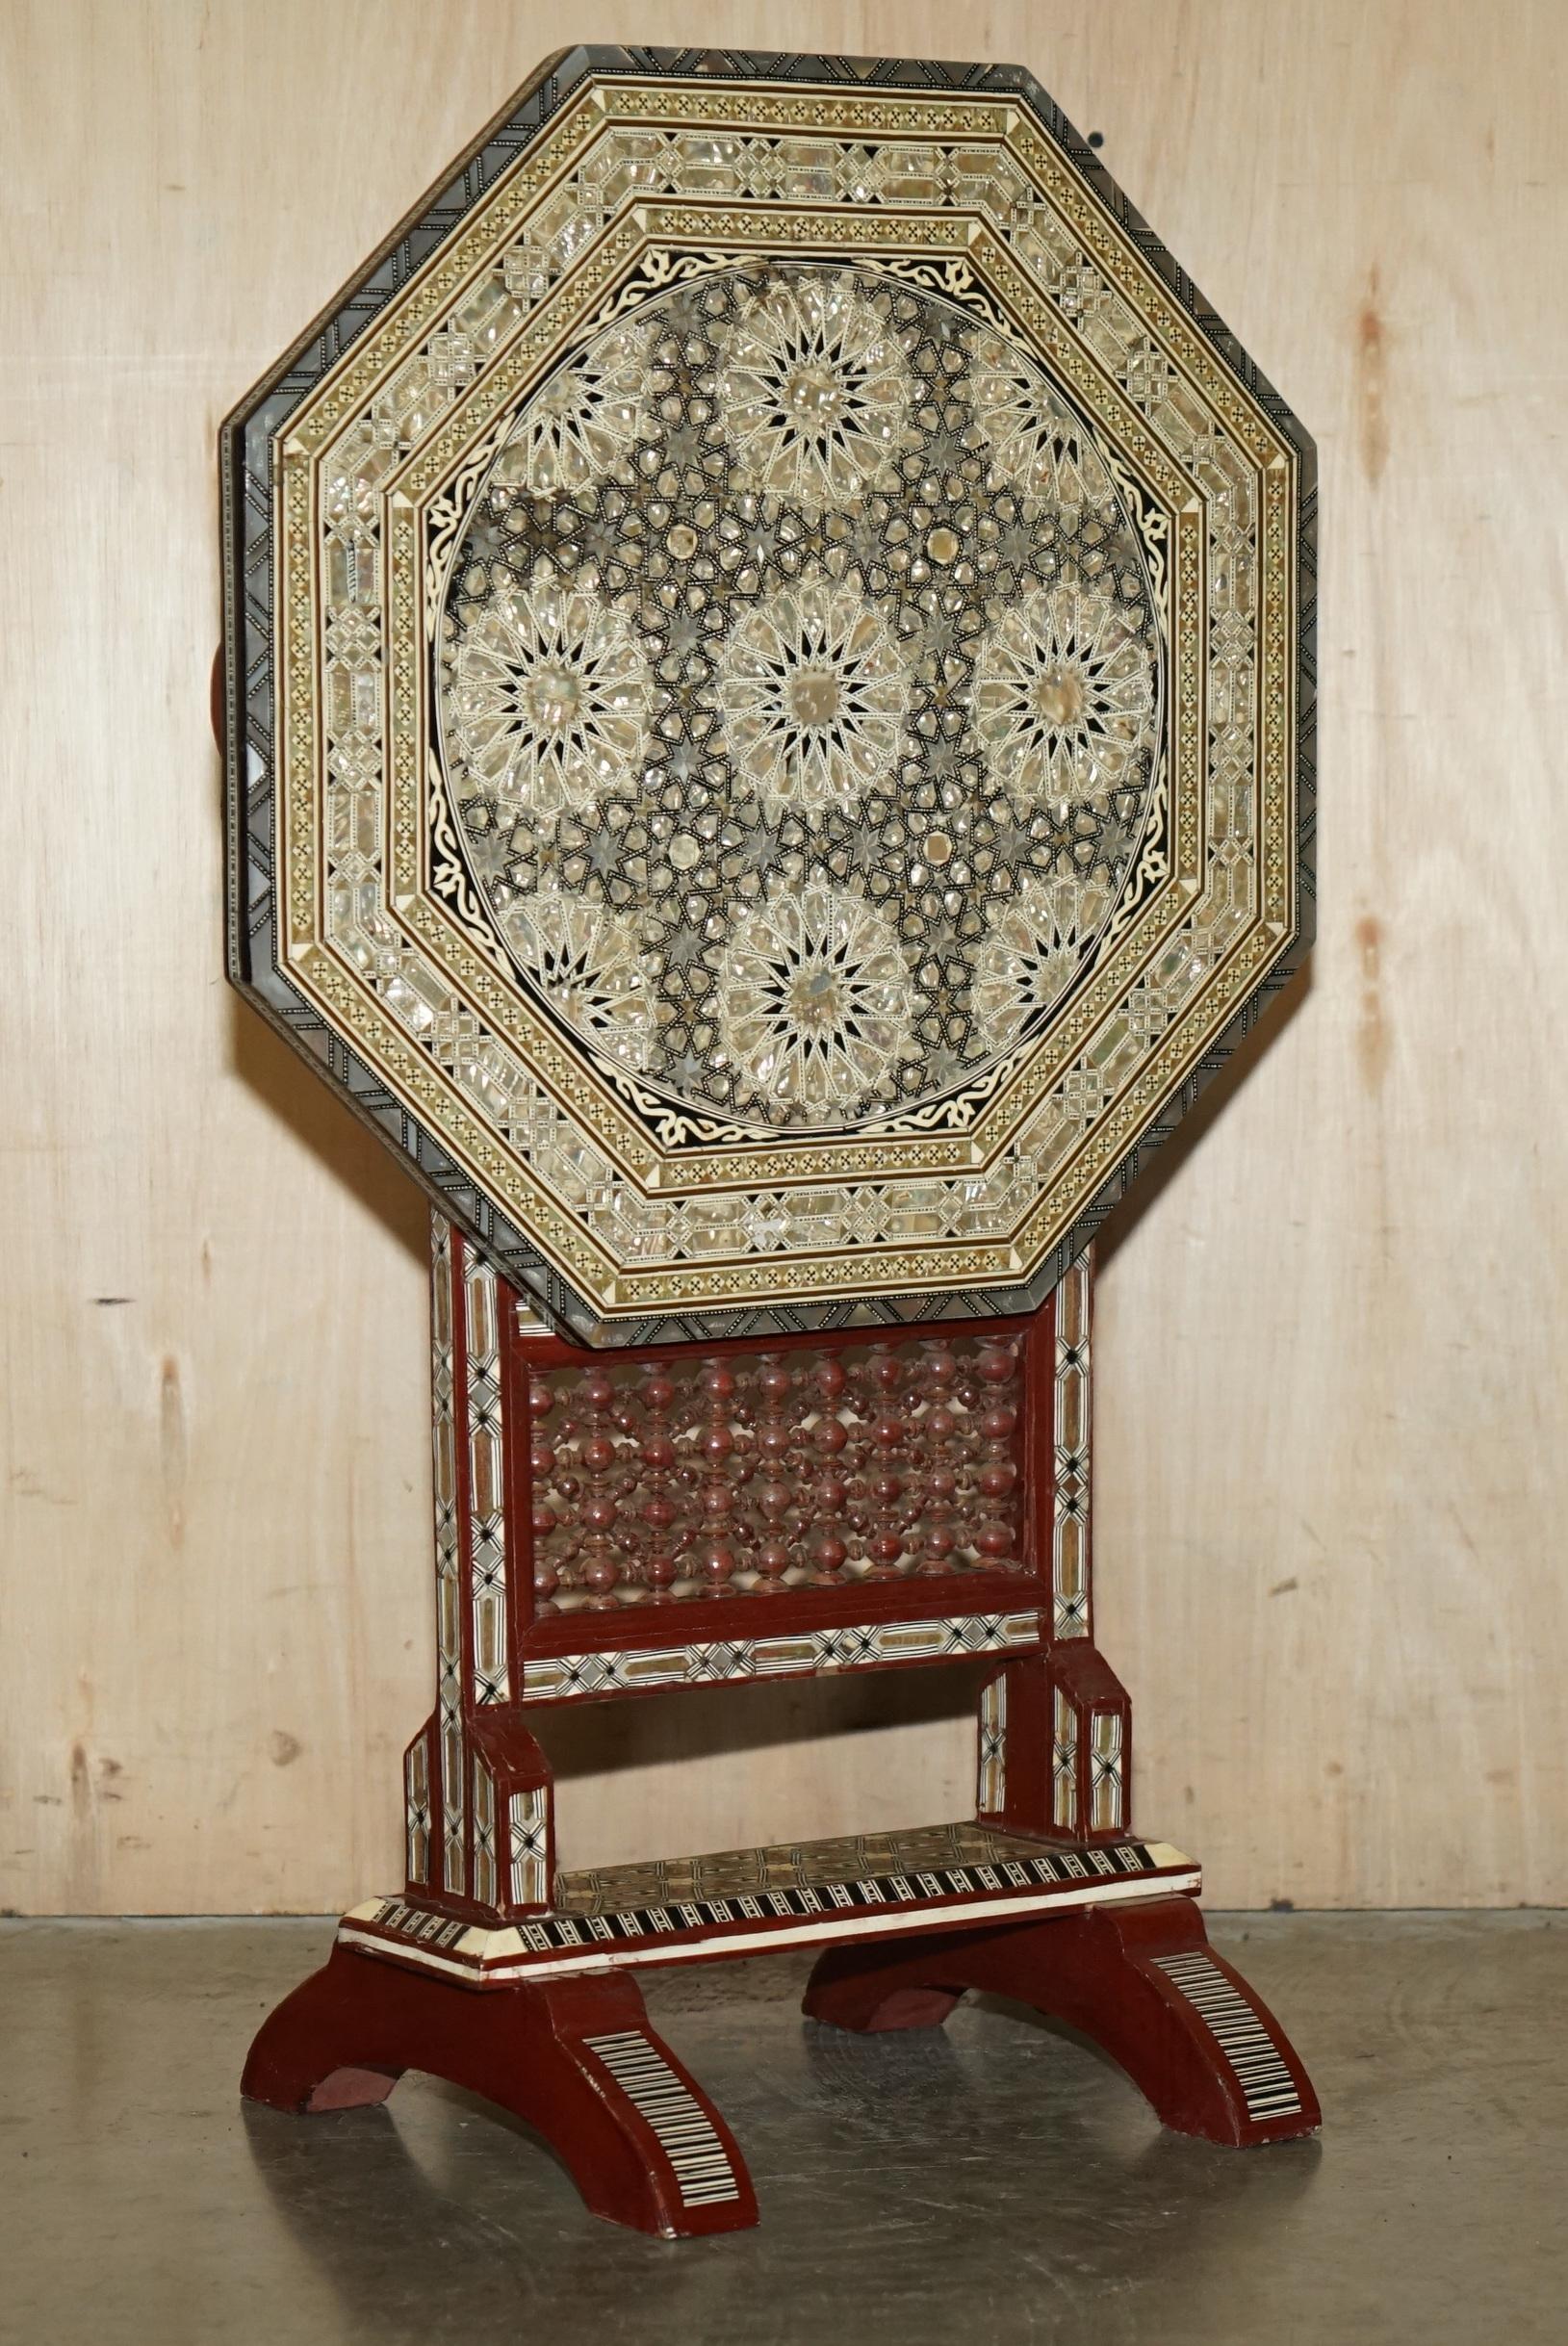 Royal House Antiques

Royal House Antiques is delighted to offer for sale this lovely an exceptionally rare Syrian Mother of Pearl with Marquetry inlaid wood tilt top side or occasional table

Please note the delivery fee listed is just a guide, it